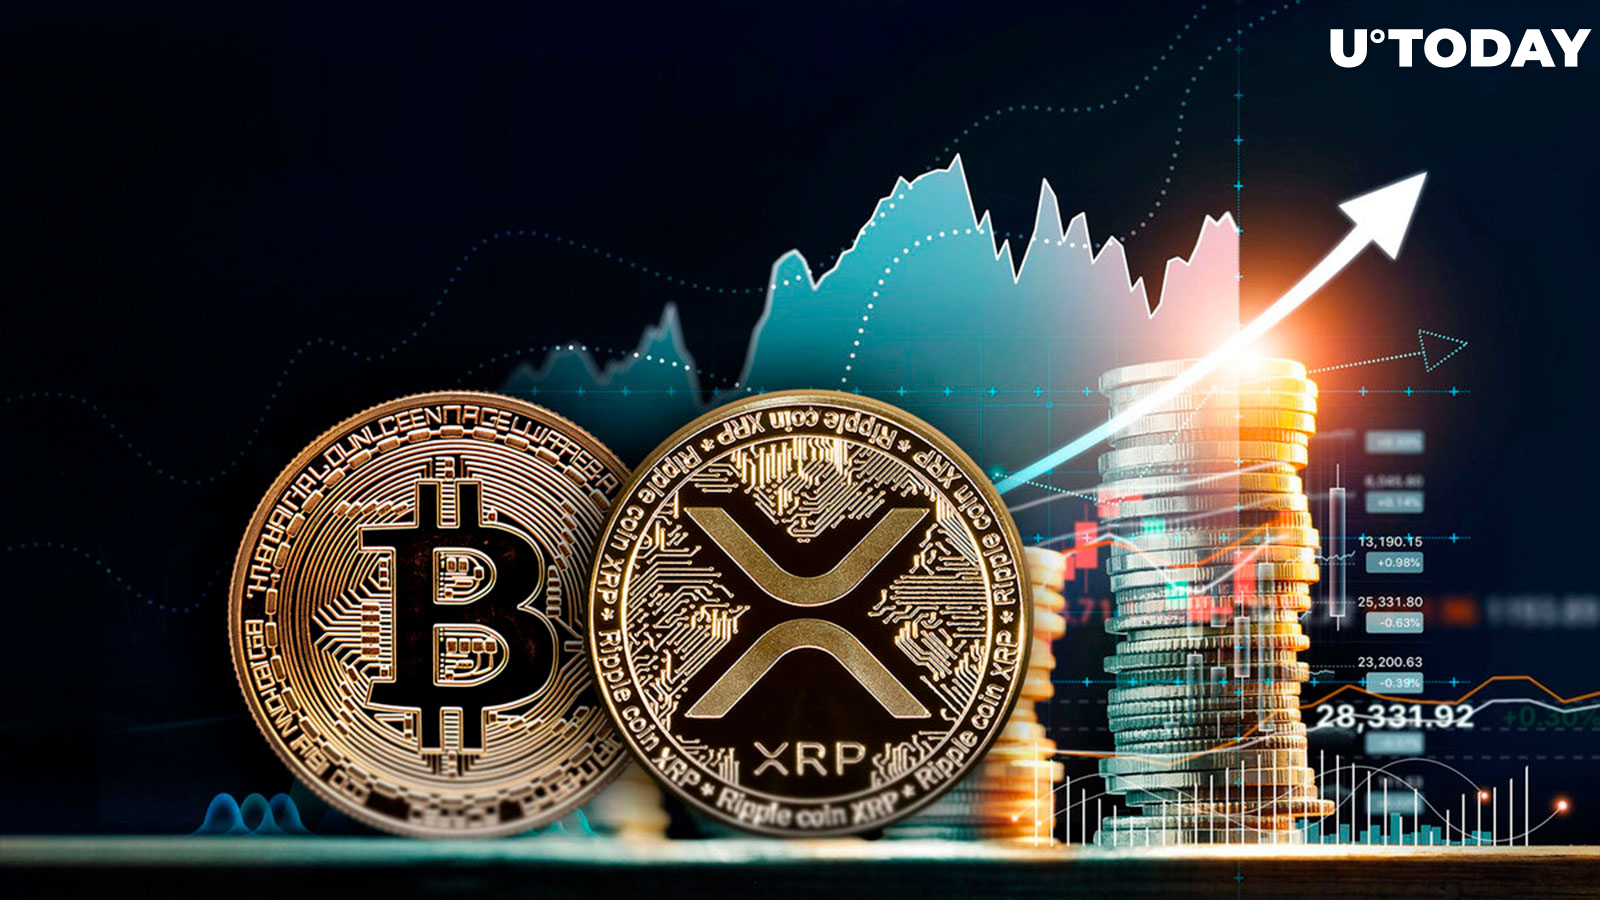 Massive Crypto Rally: Bitcoin Tops $35,000 While XRP Surpasses $0.55